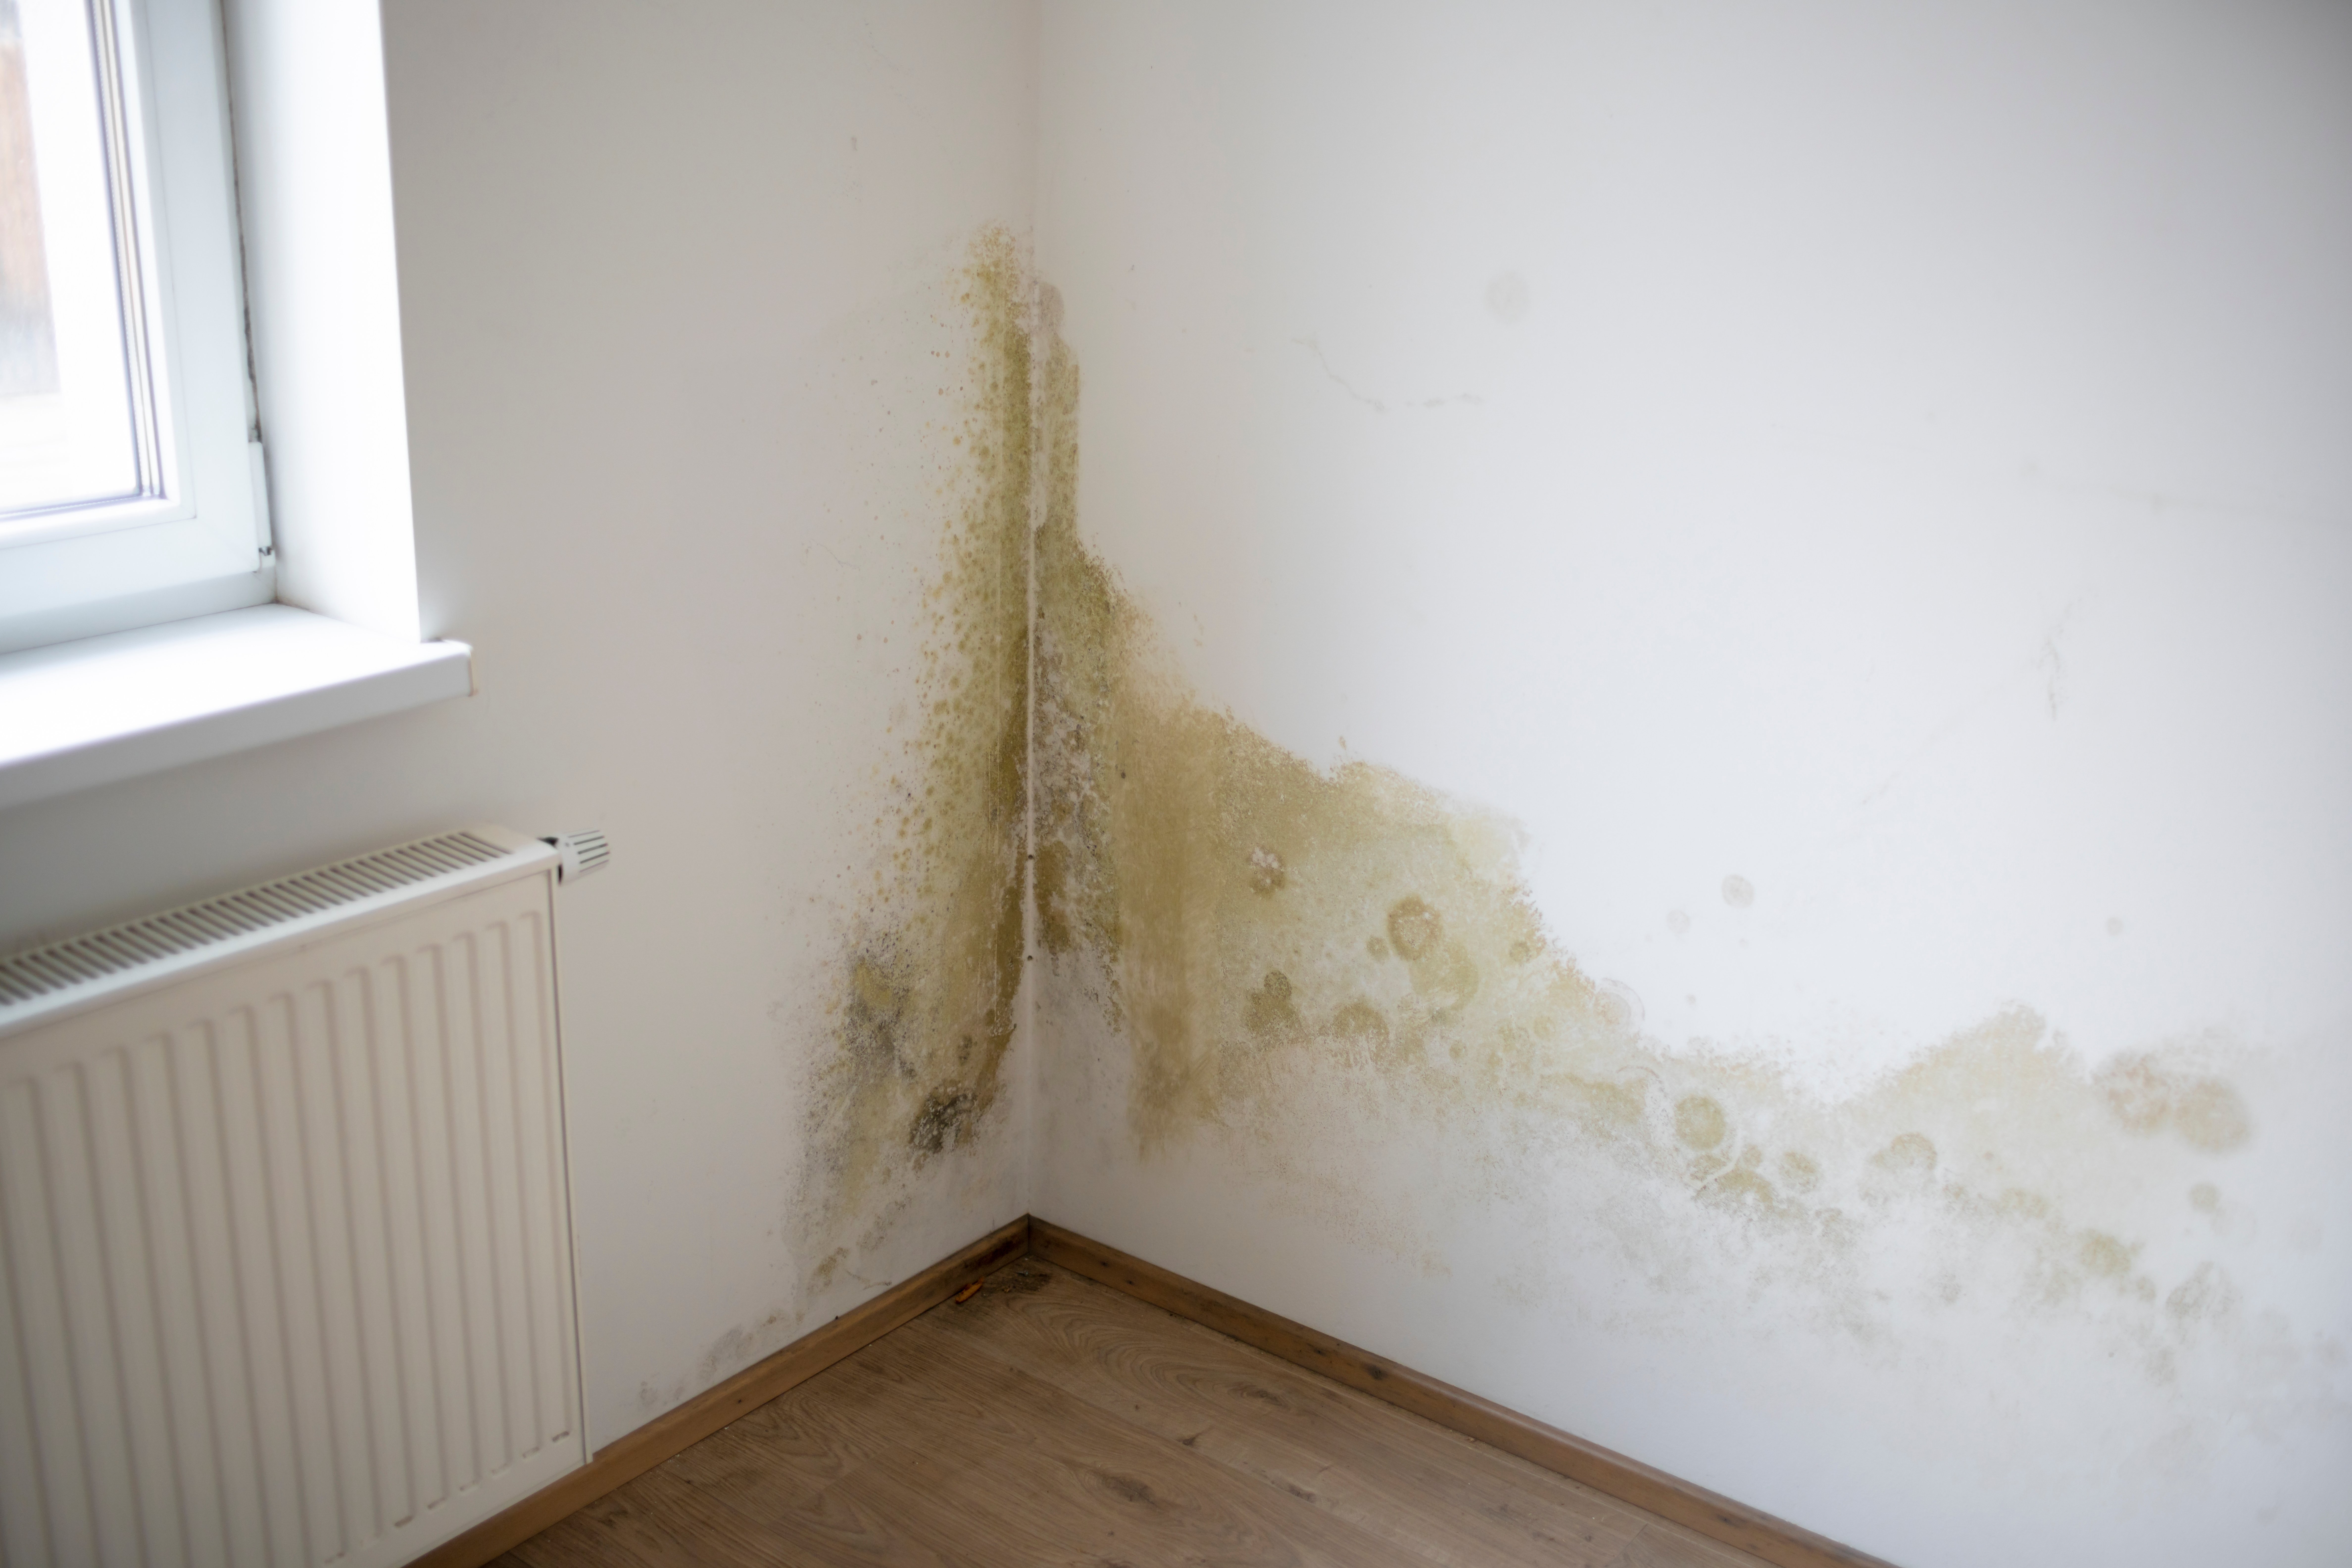 Mold and mildew stains on an interior wall are common in Pittsburgh